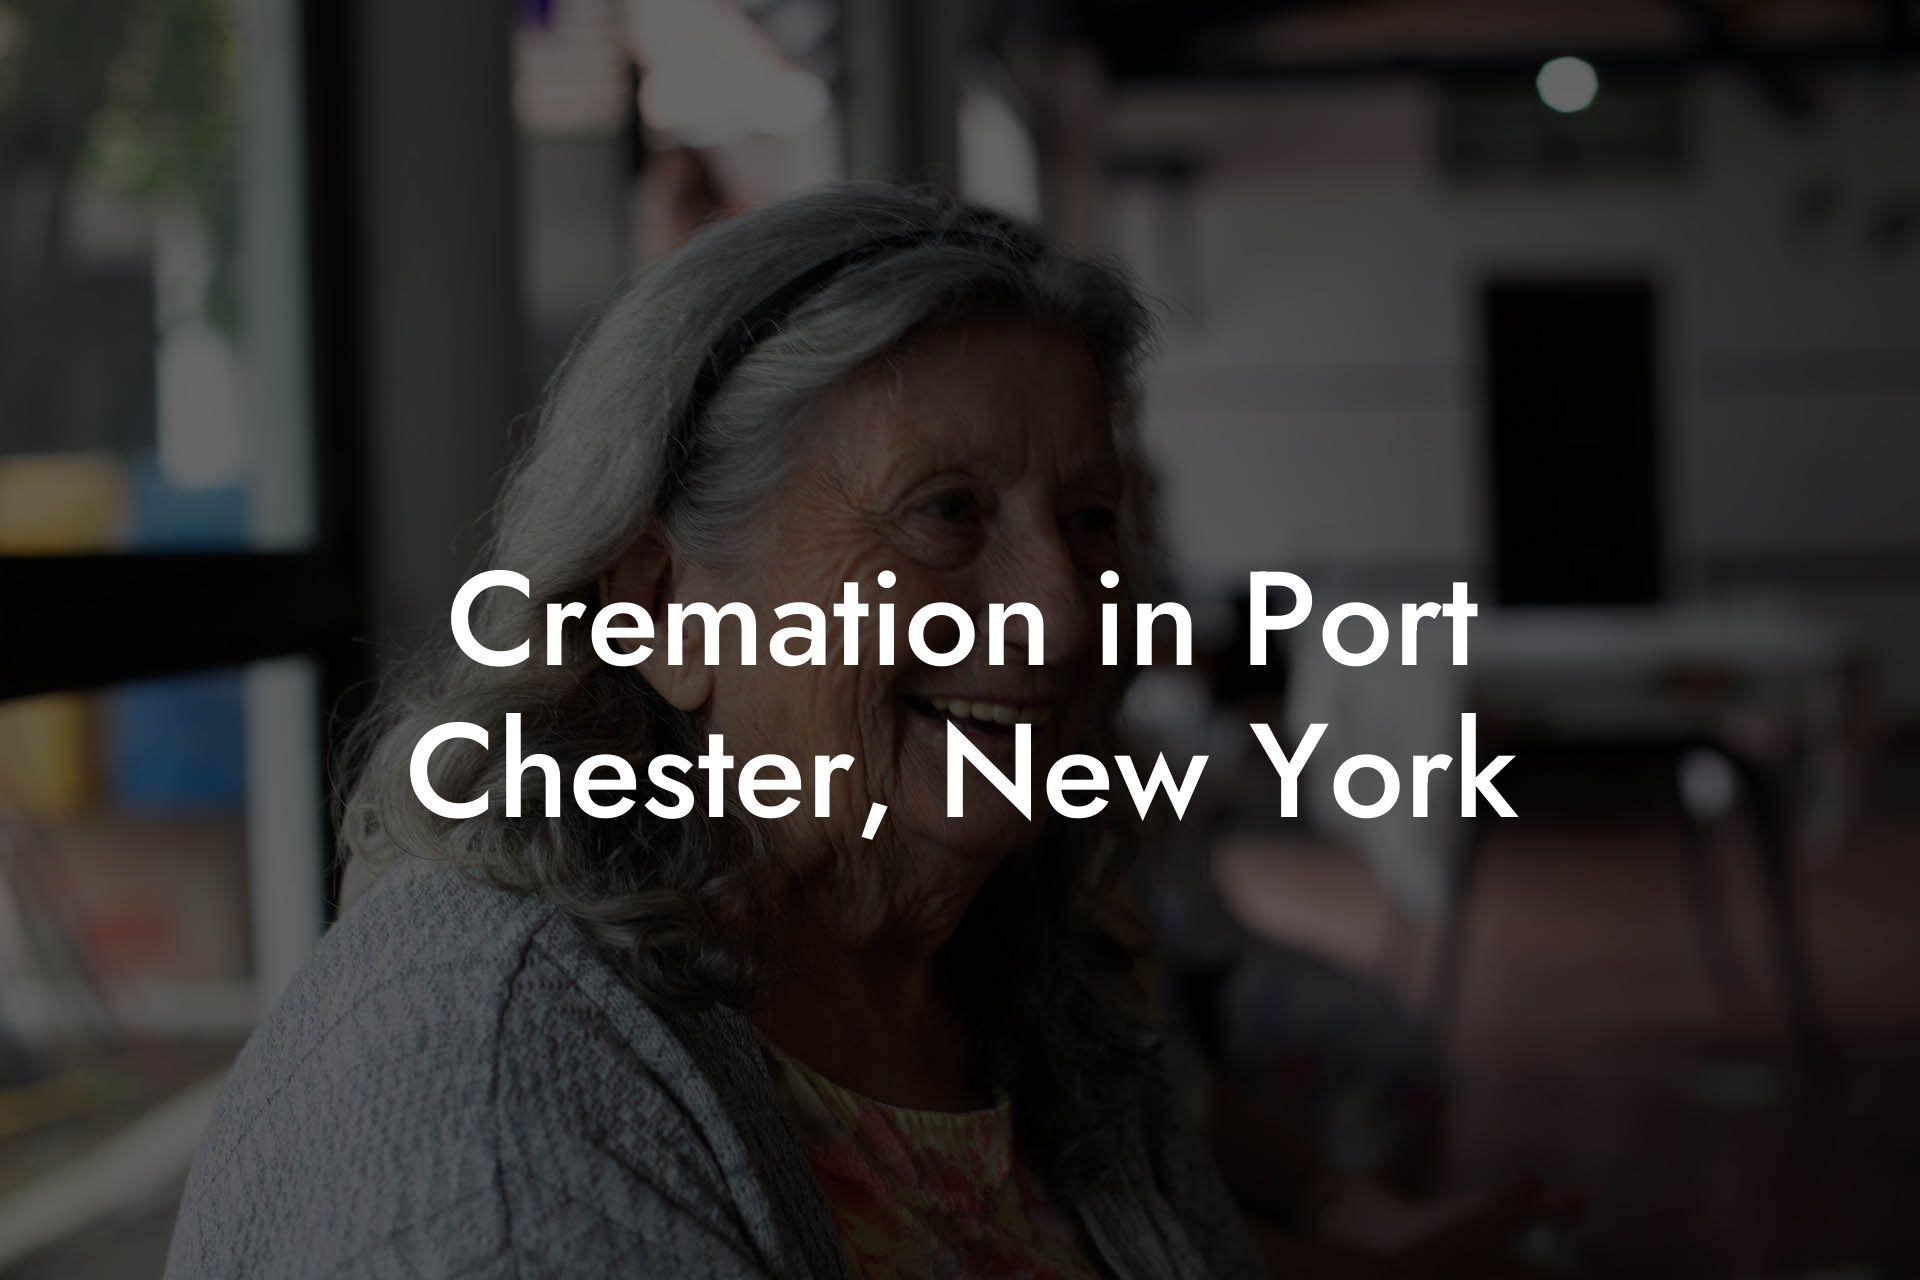 Cremation in Port Chester, New York